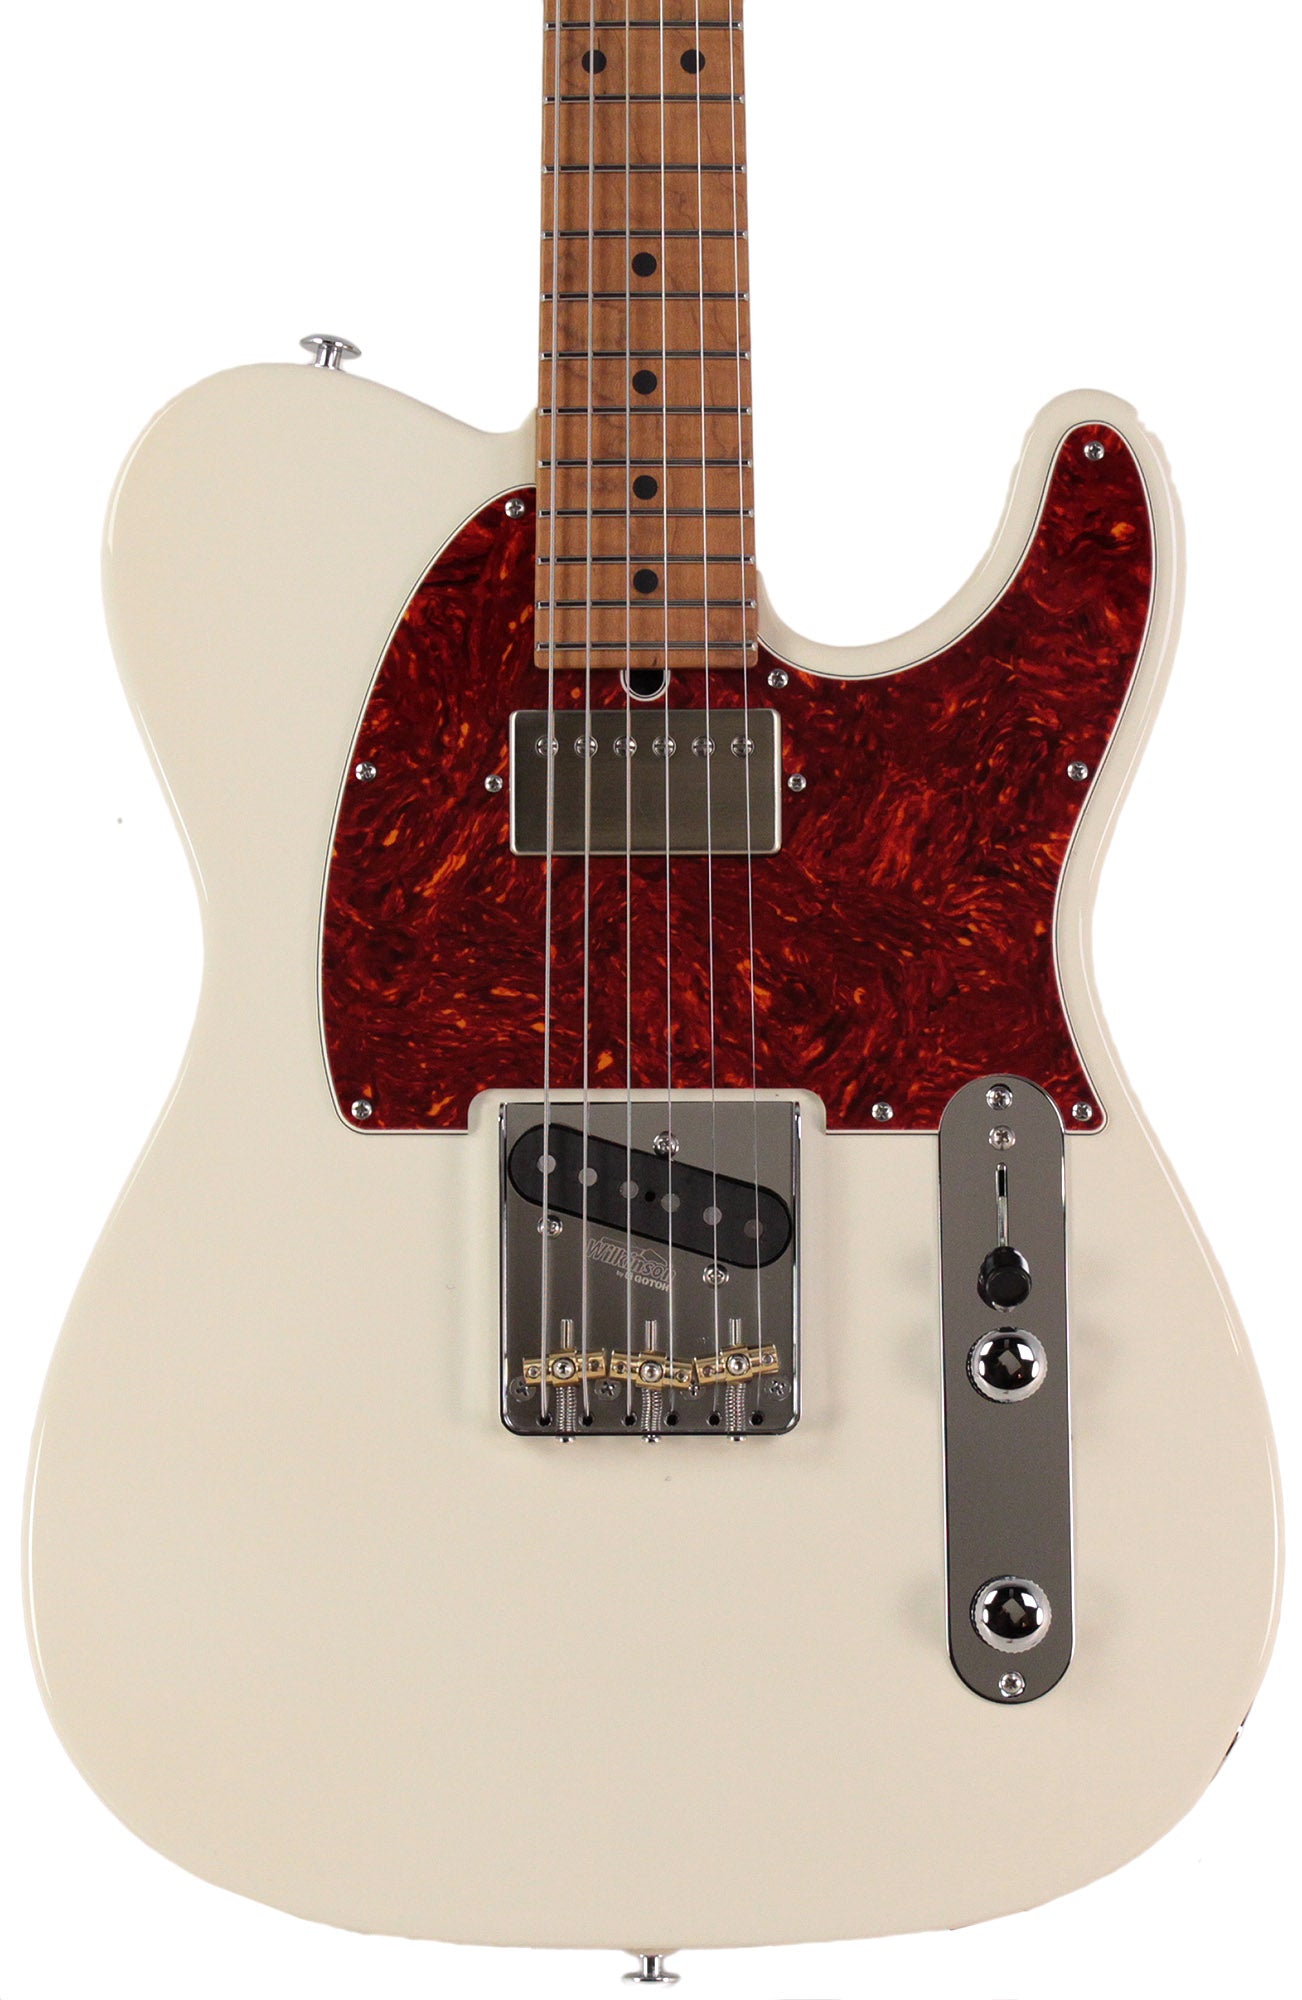 Suhr Classic TS OWH mod | www.sportique.nu